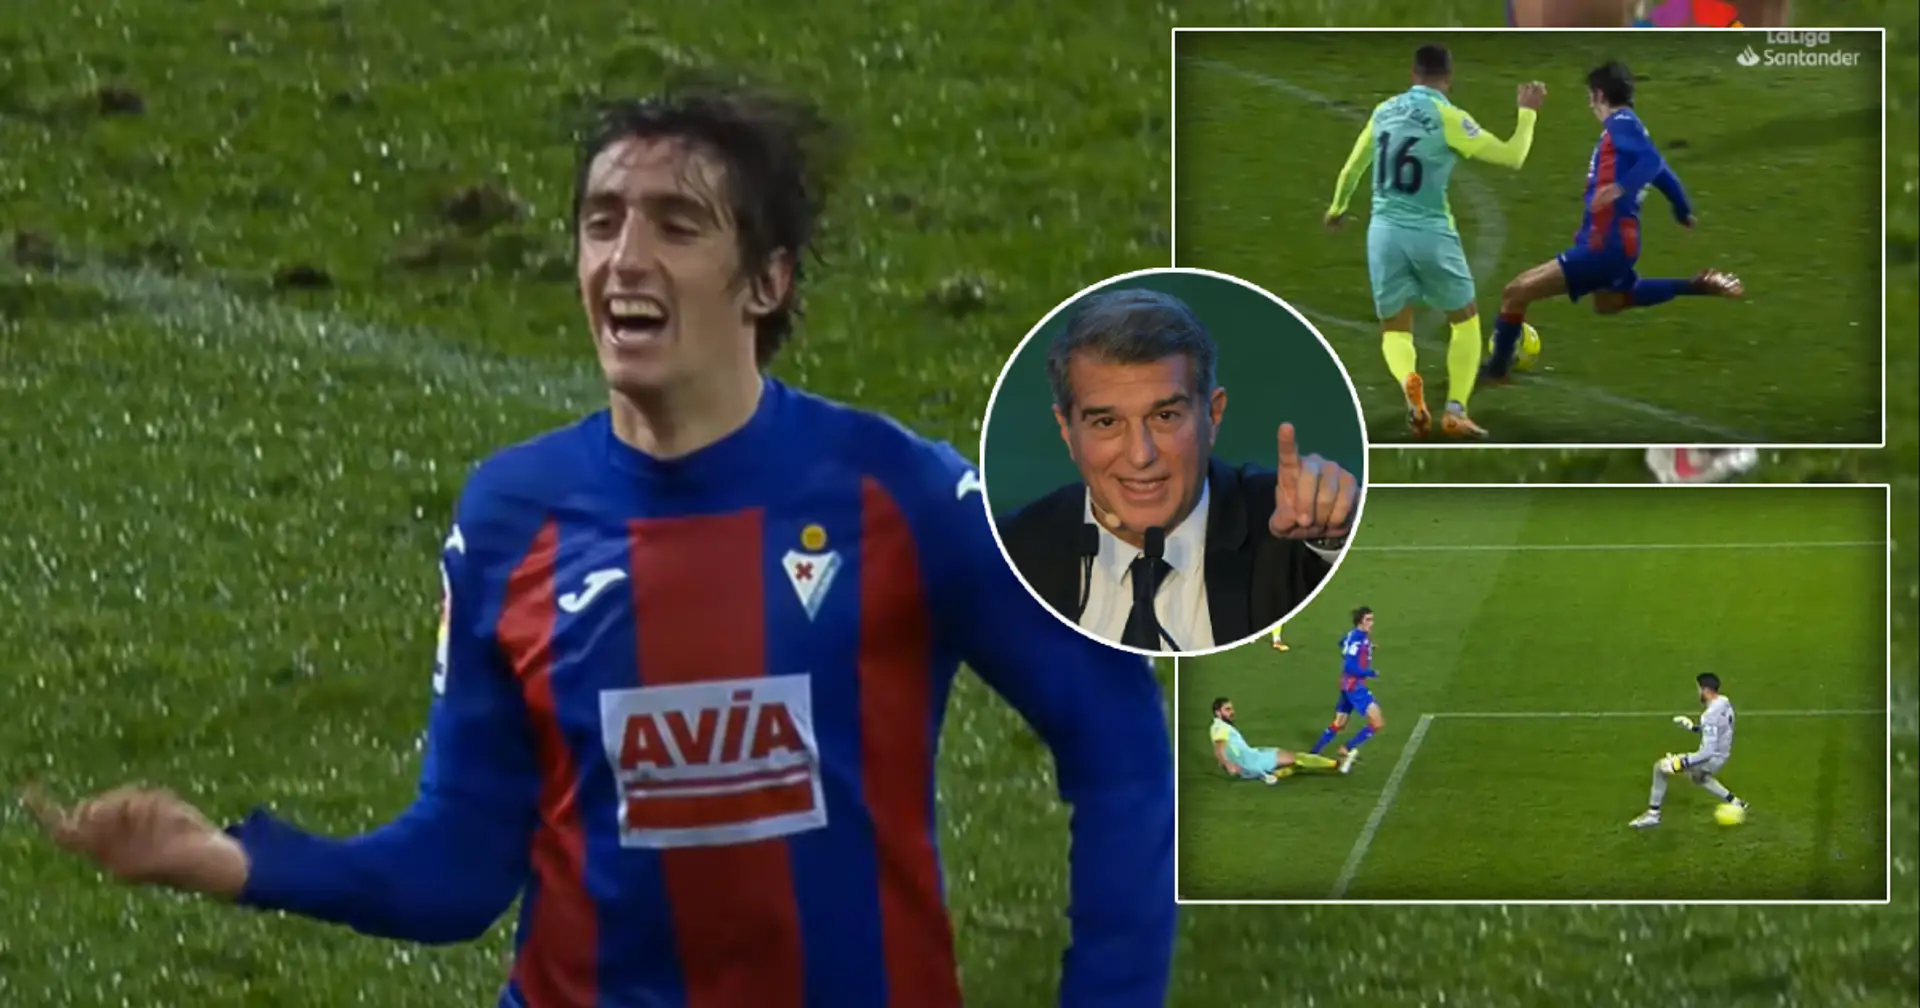 HIGHLIGHTS: Here's why Joan Laporta is 'in love with' Bryan Gil - 2 goals, 8/10 rating in his finest La Liga performance yet